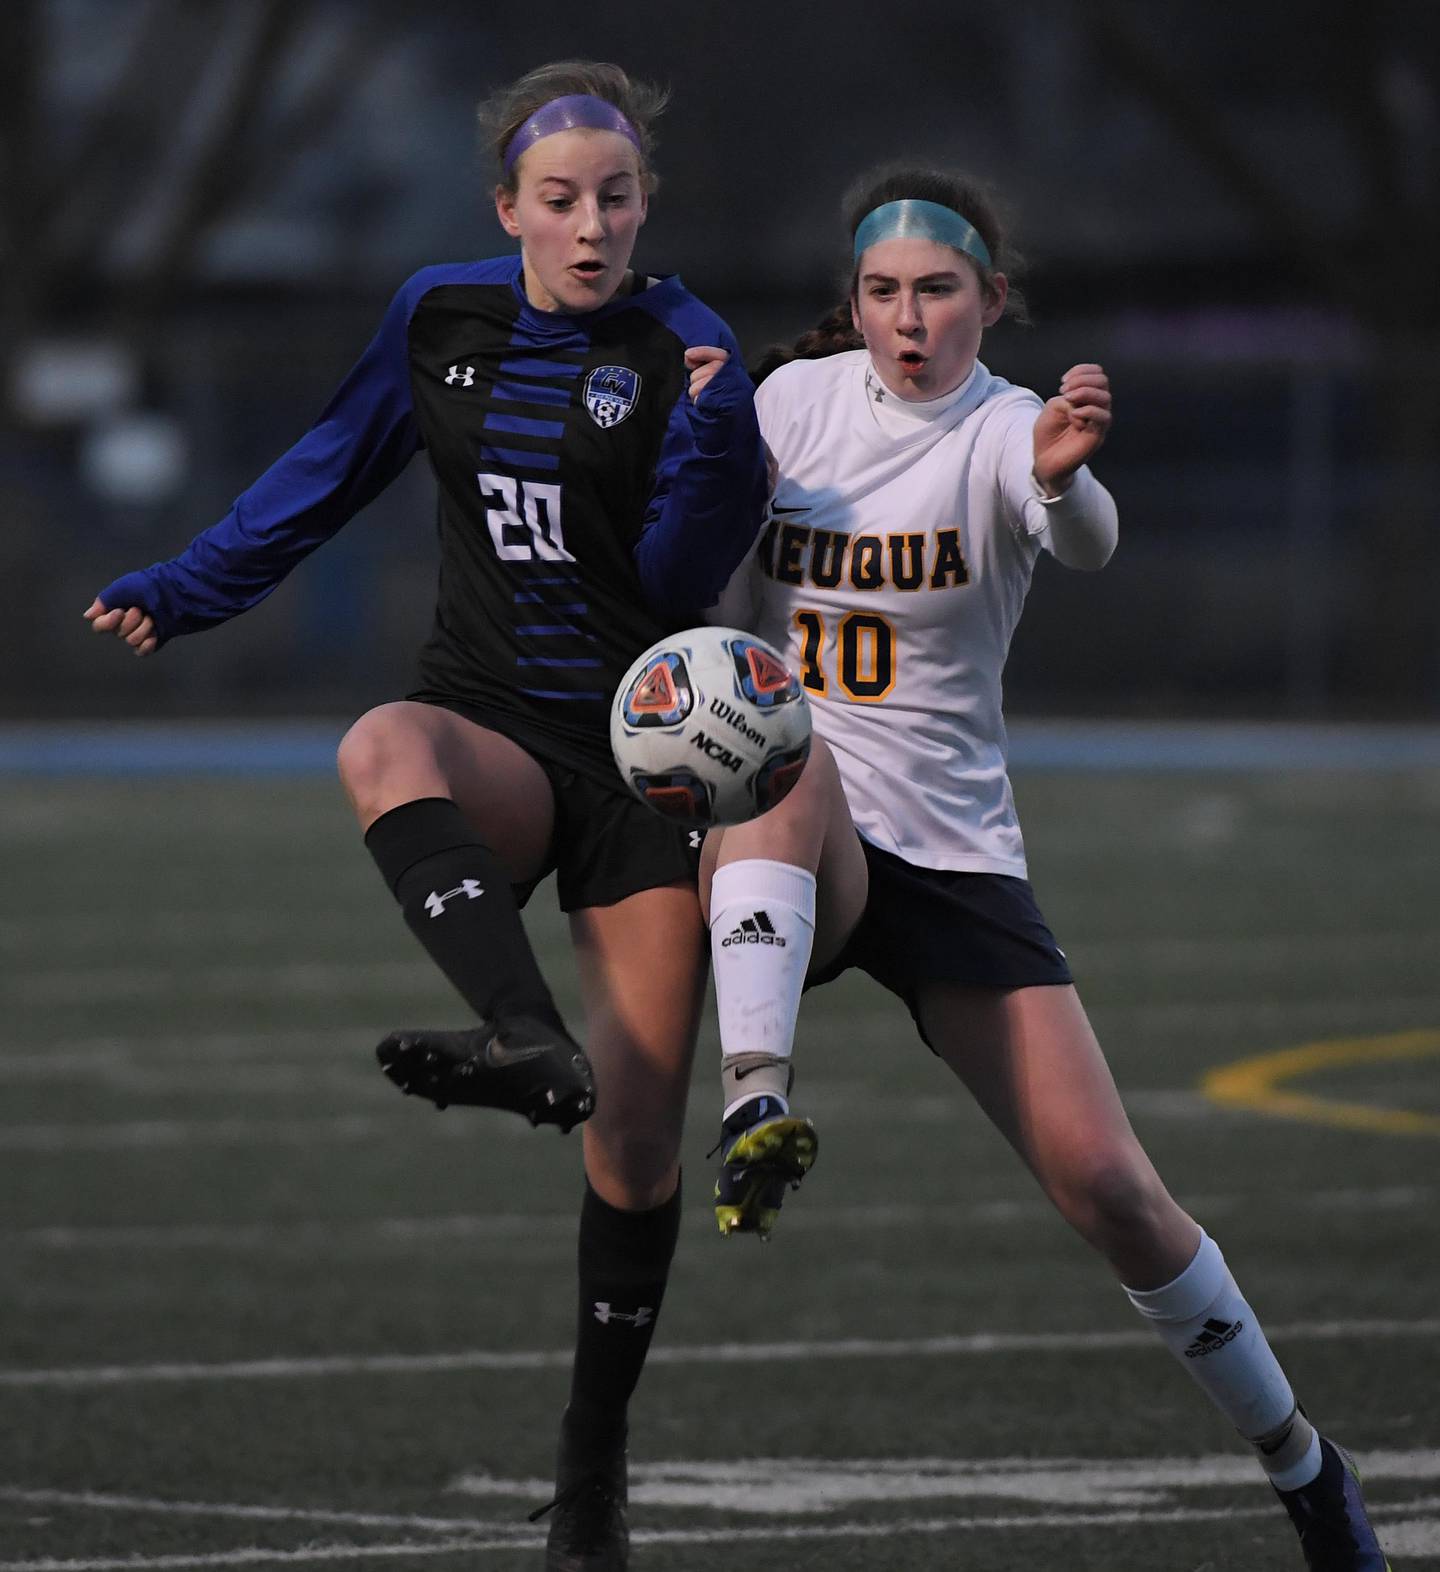 Geneva’s Caroline Madden and Neuqua Valley’s Alexis May compete for the ball in a girls soccer game in Geneva on Thursday, March 23, 2023.